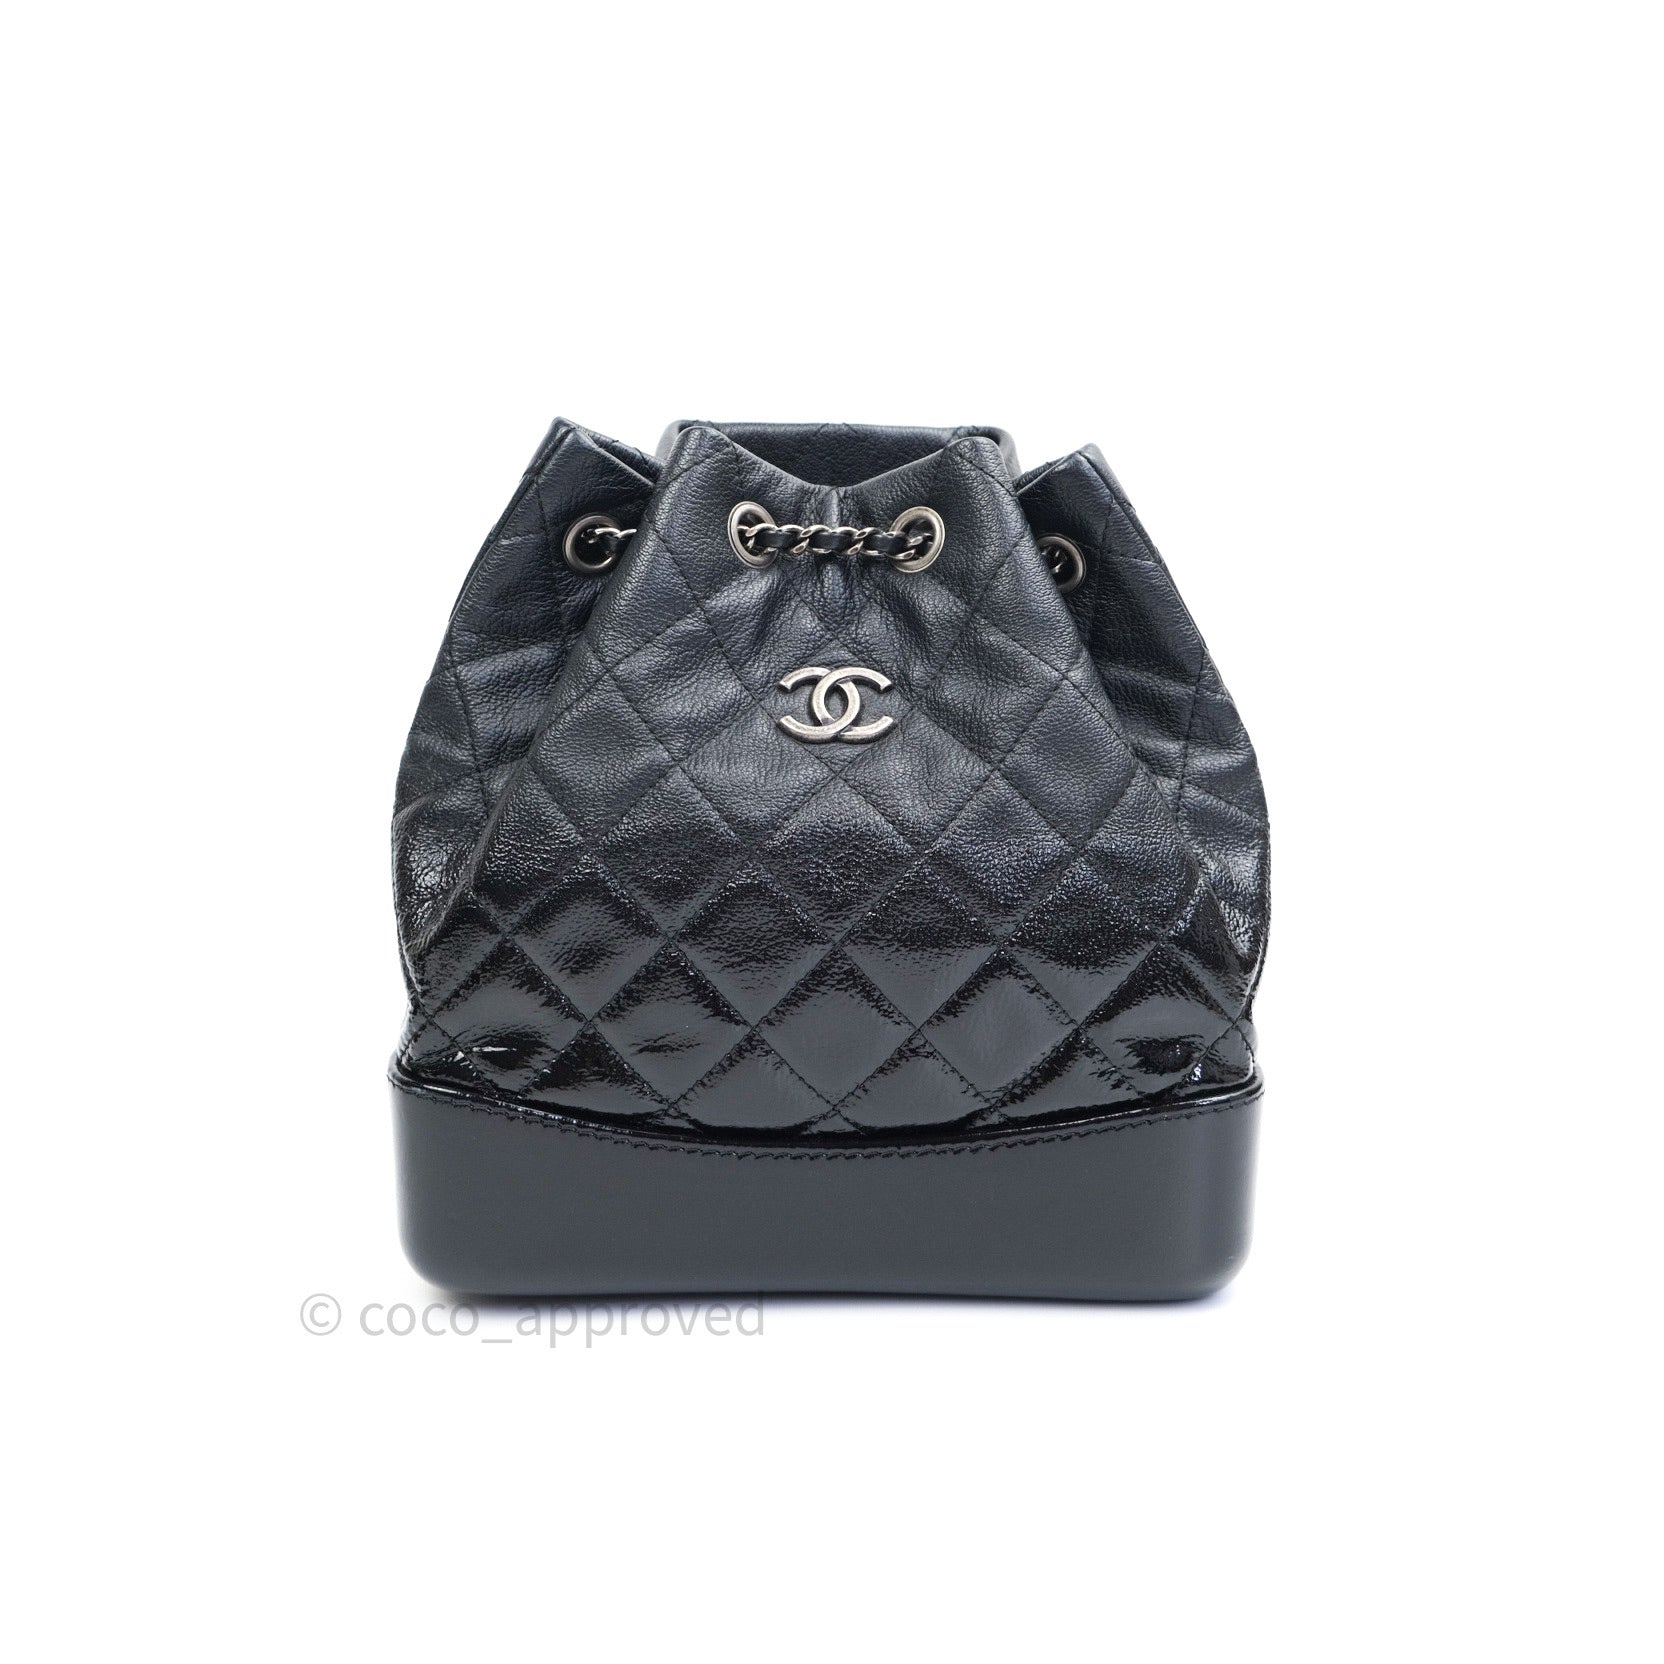 gabrielle chanel backpack